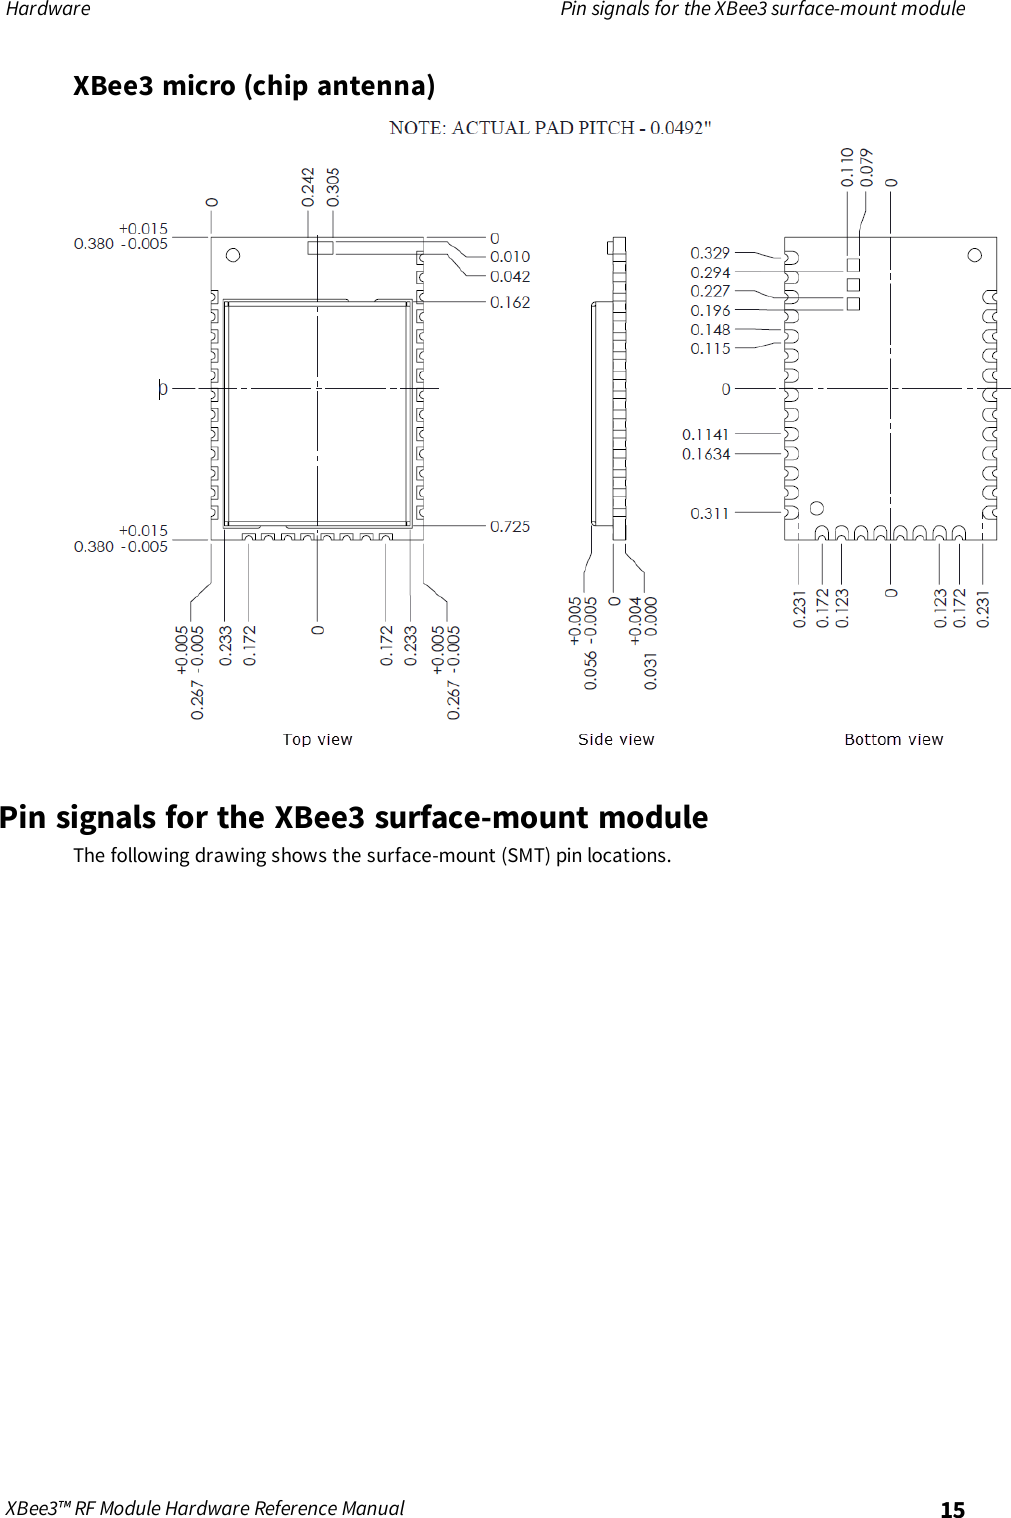 Hardware Pin signals for the XBee3 surface-mount moduleXBee3™ RF Module Hardware Reference Manual 15XBee3 micro (chip antenna)Pin signals for the XBee3 surface-mount moduleThe following drawing shows the surface-mount (SMT) pin locations.